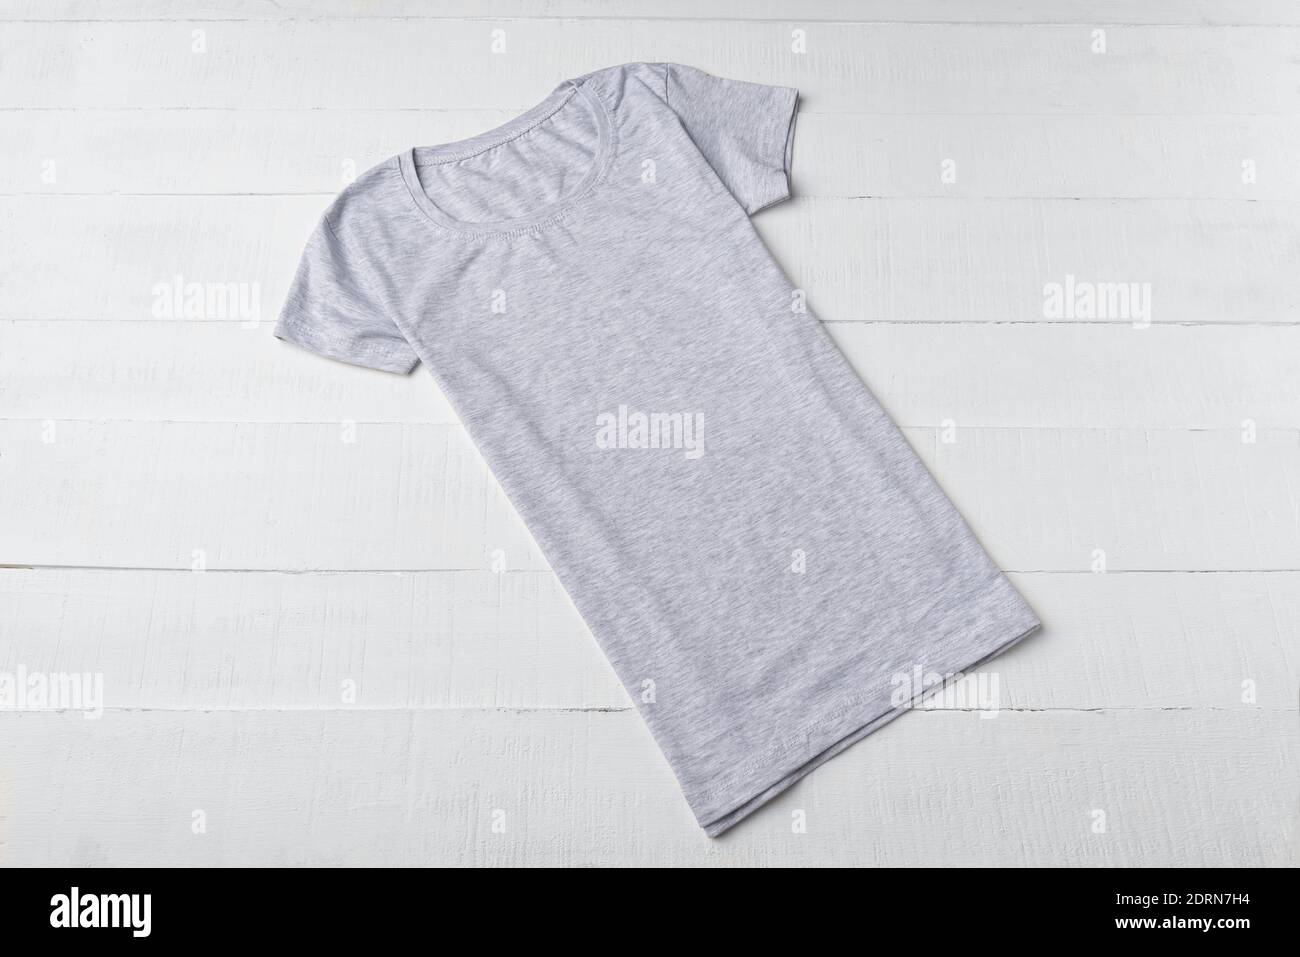 Download T Shirt Mockup High Resolution Stock Photography And Images Alamy